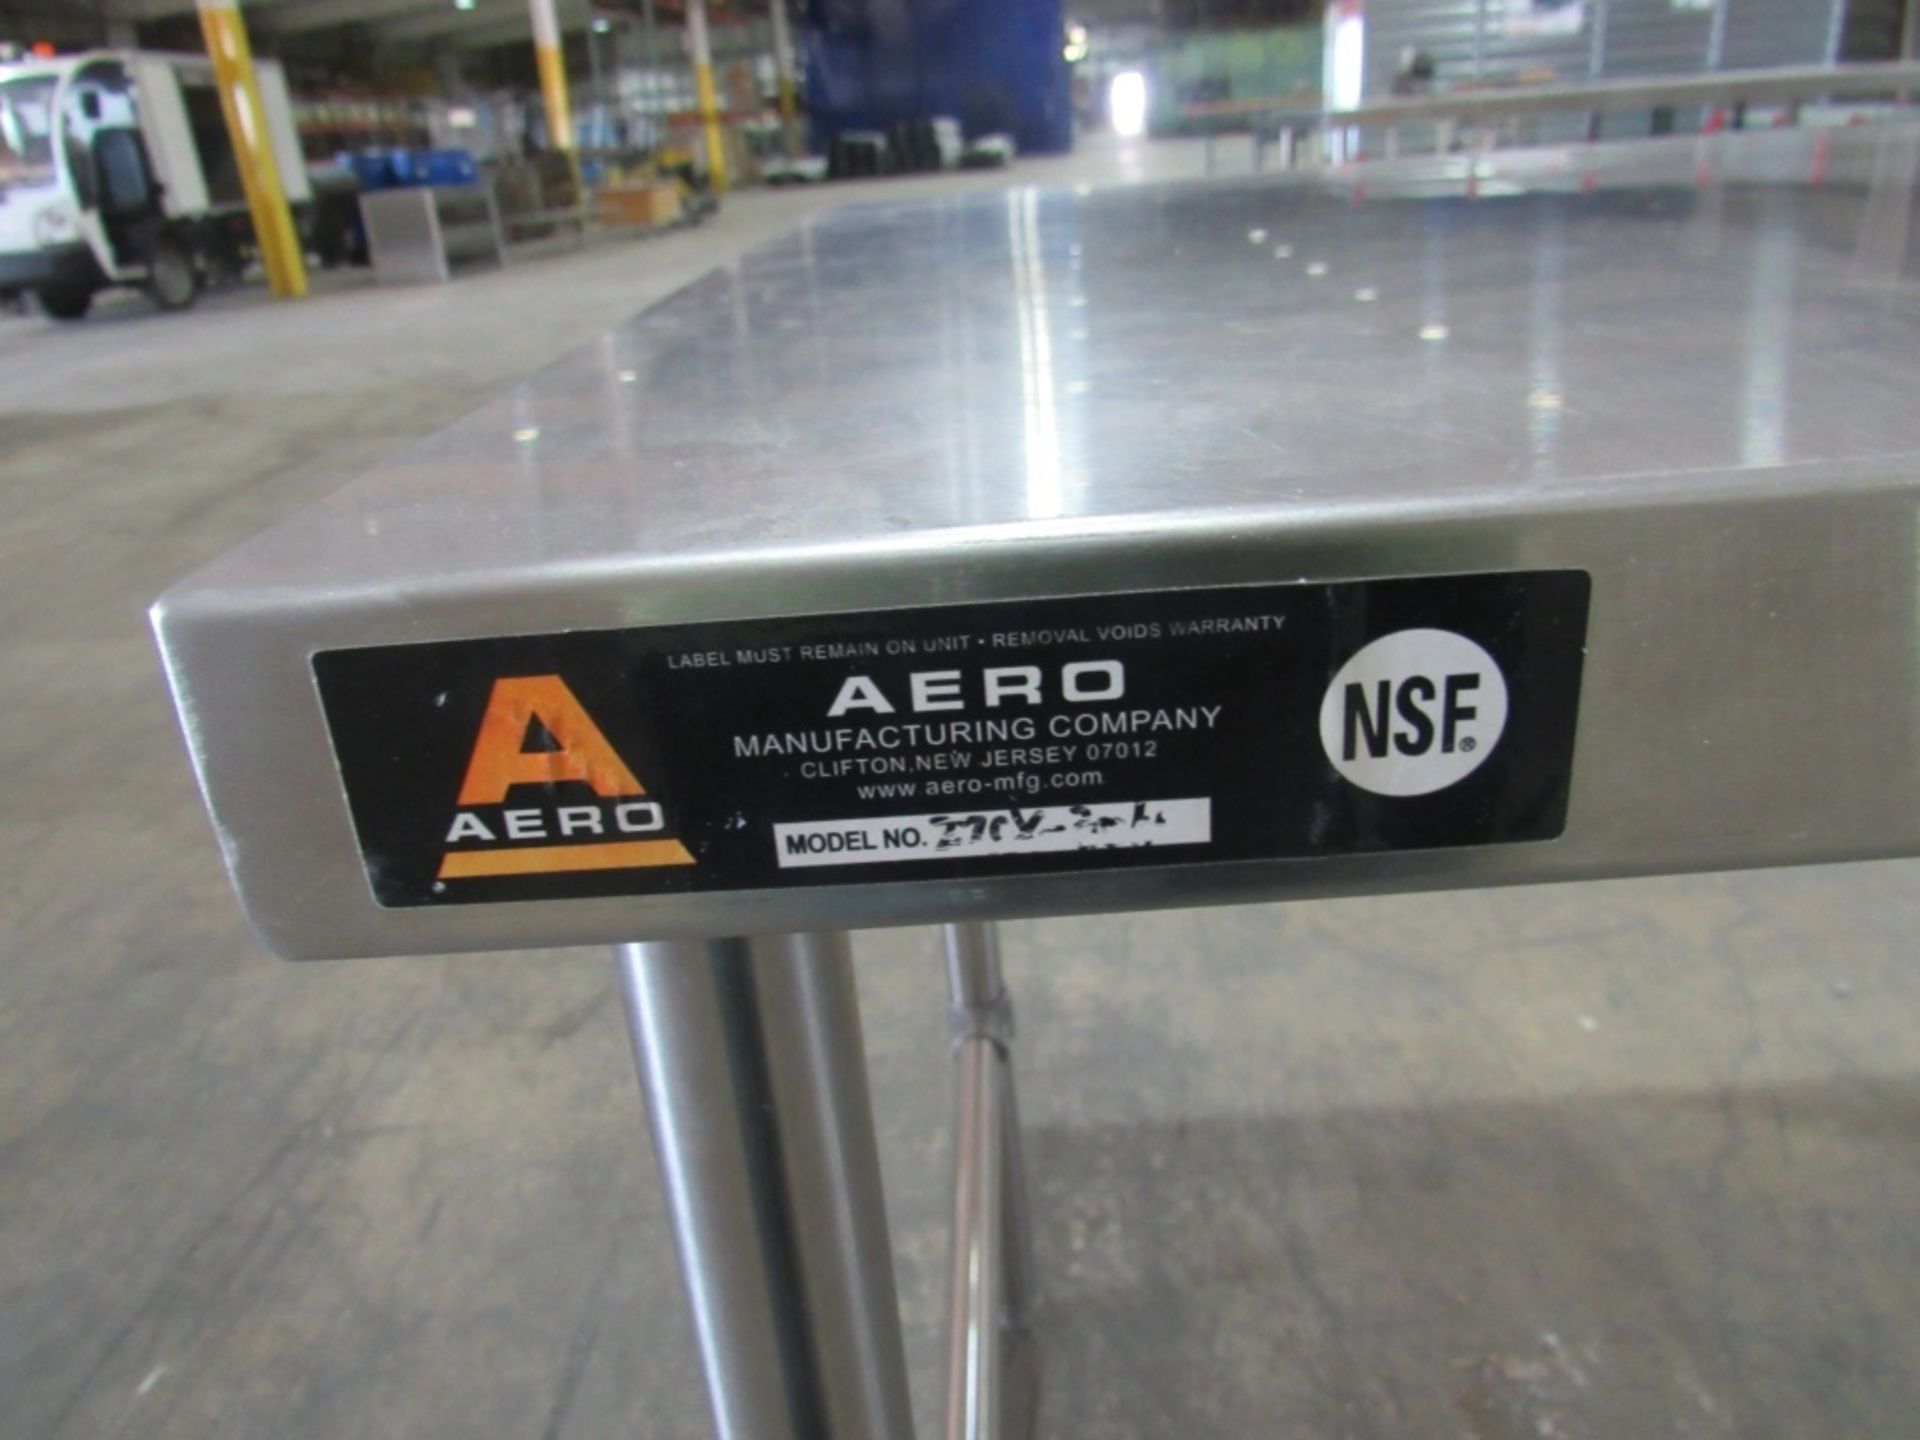 Stainless Steel Table- - Image 6 of 7